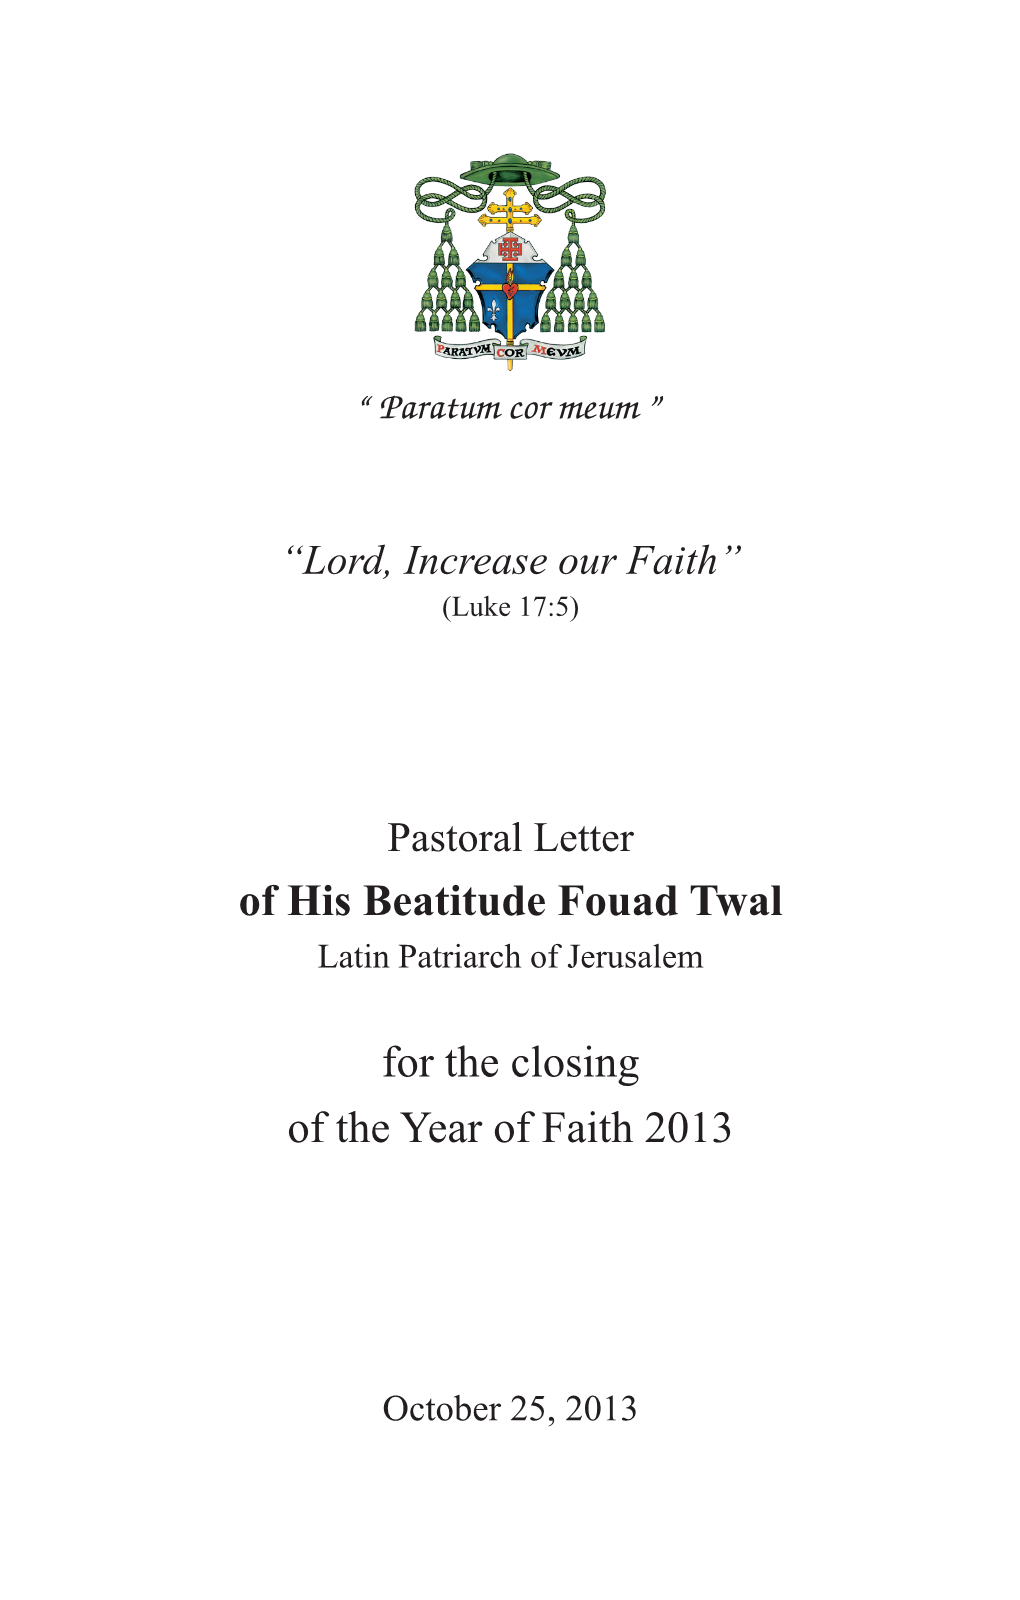 Of His Beatitude Fouad Twal for the Closing of the Year of Faith 2013